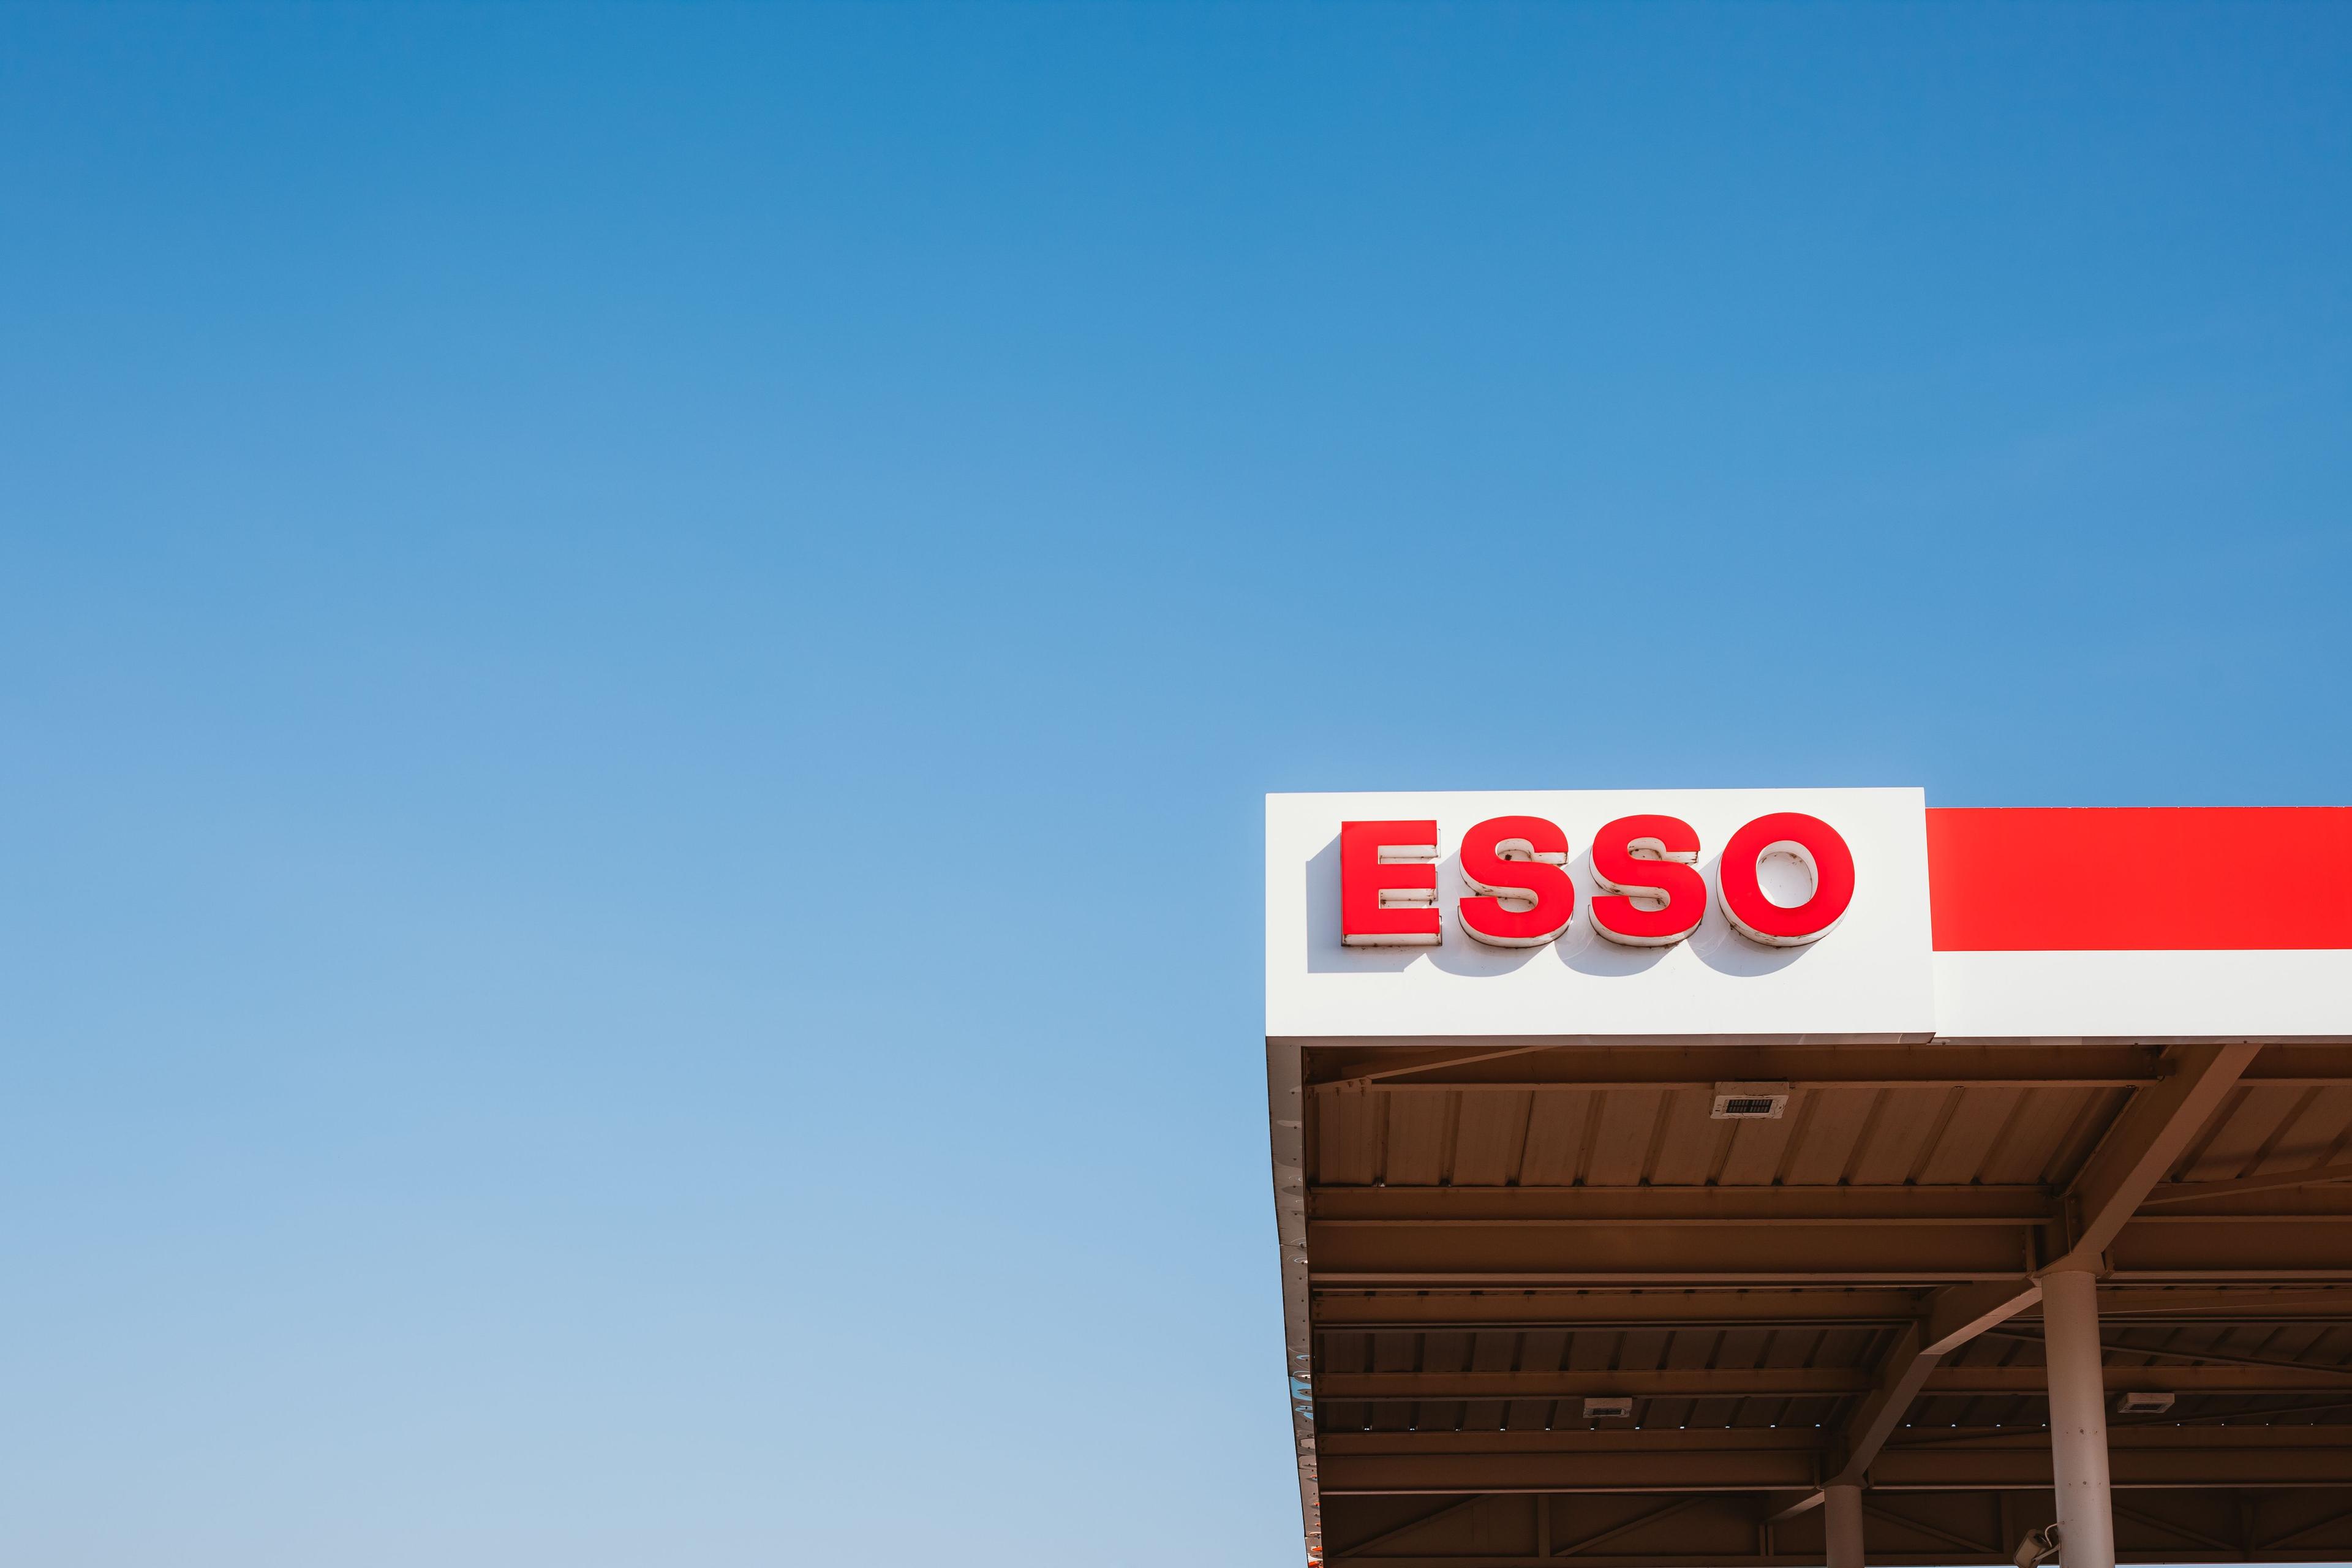 Esso fuel cards for businesses and fleets